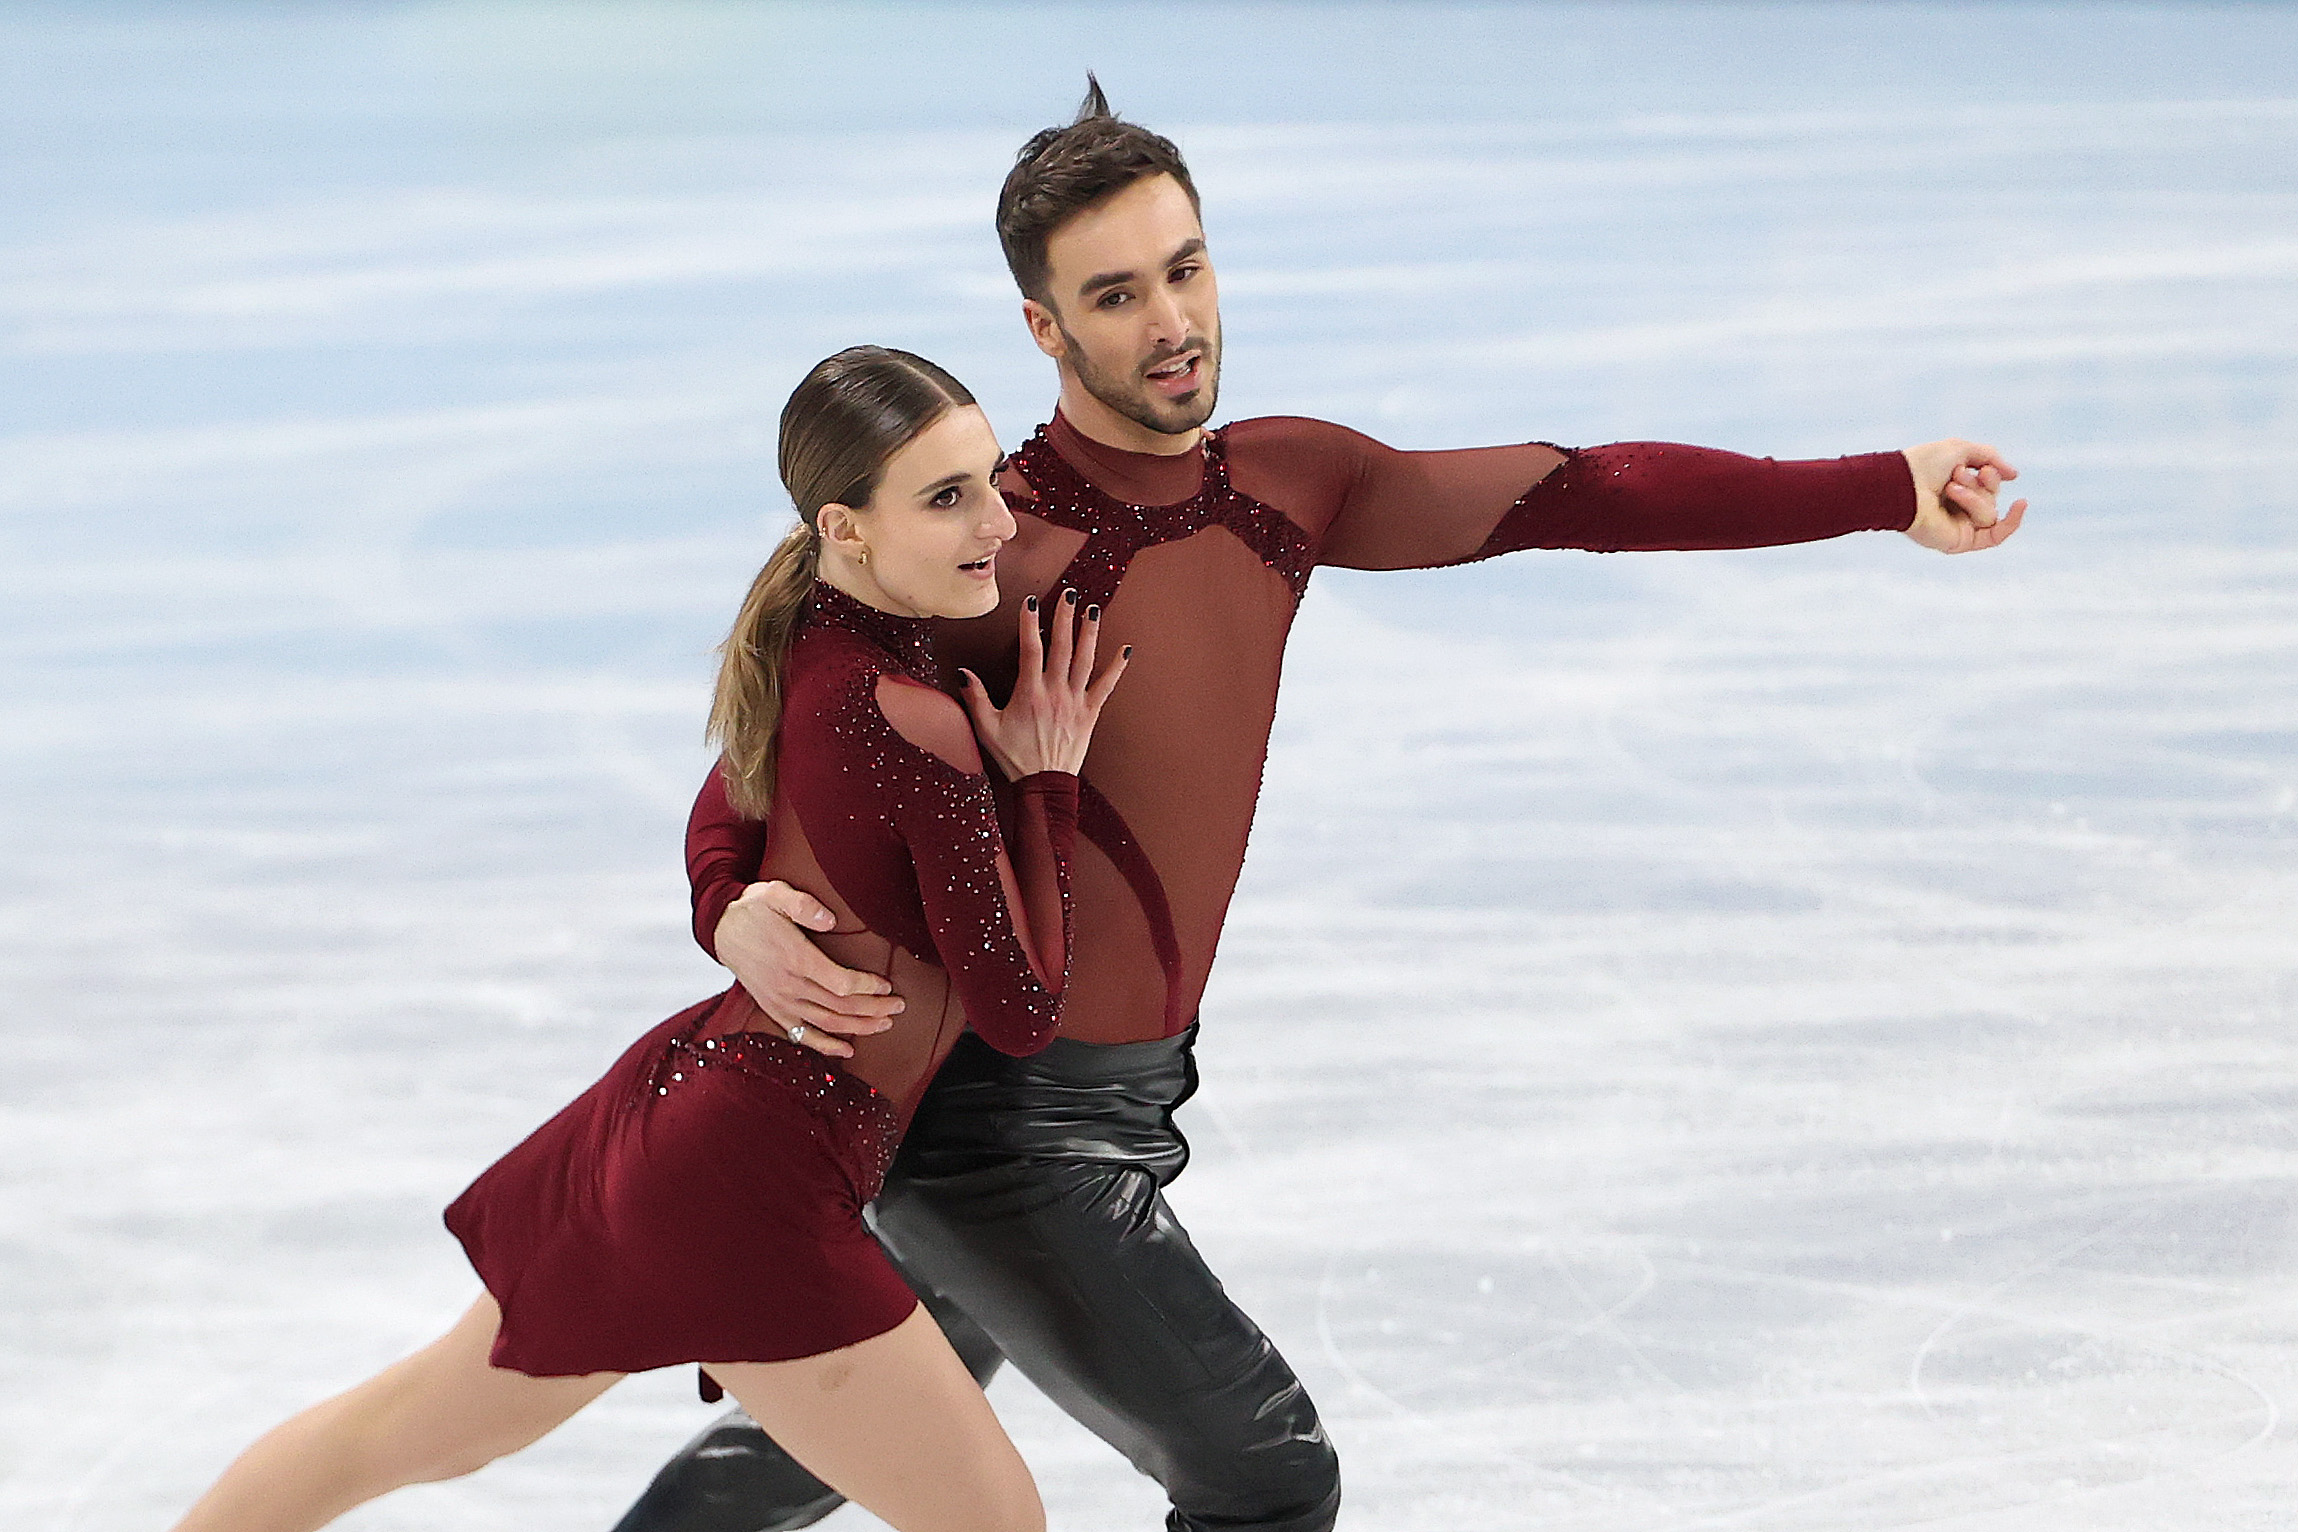 Re-Watch Some of the Most Mesmerizing Olympic Ice Dancing Performances So Far